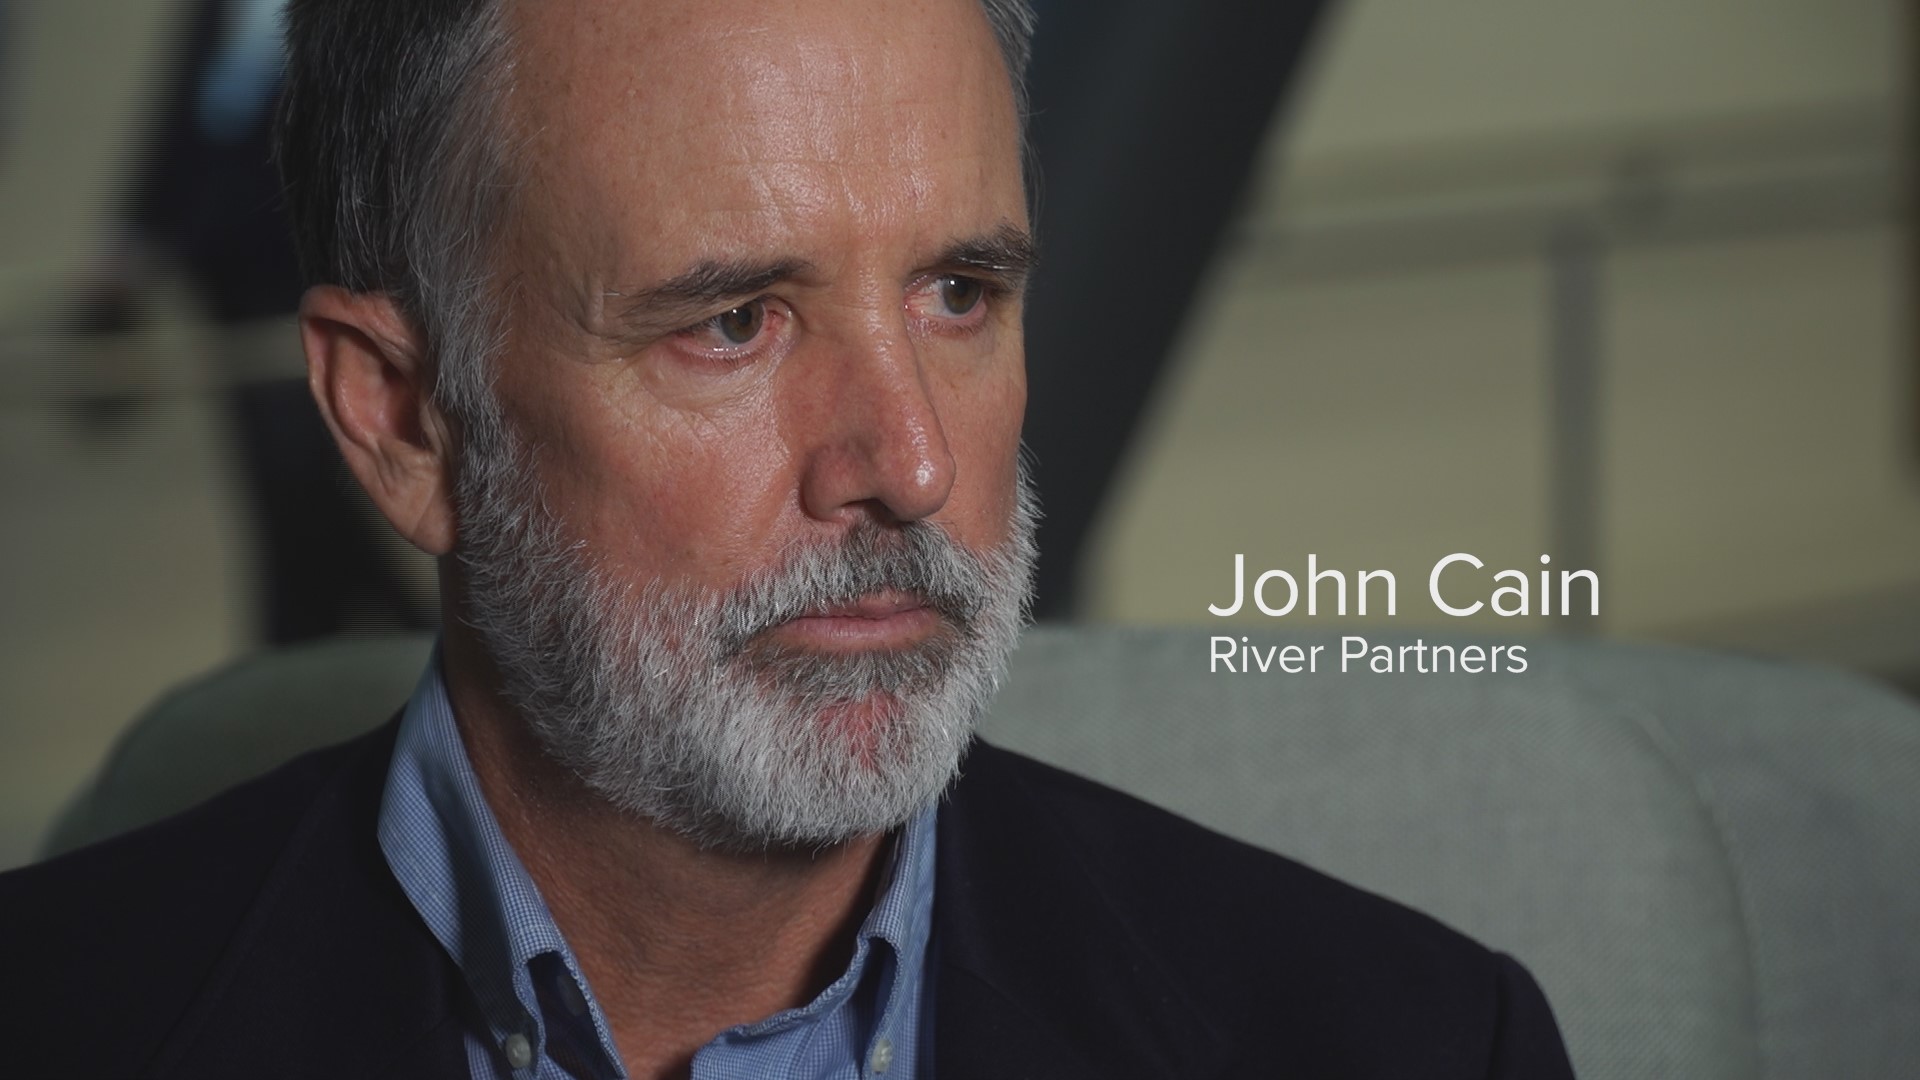 Meteorologist Brenden Mincheff sits down with John Cain of River Partners to talk about flood protections, despite the current drought.